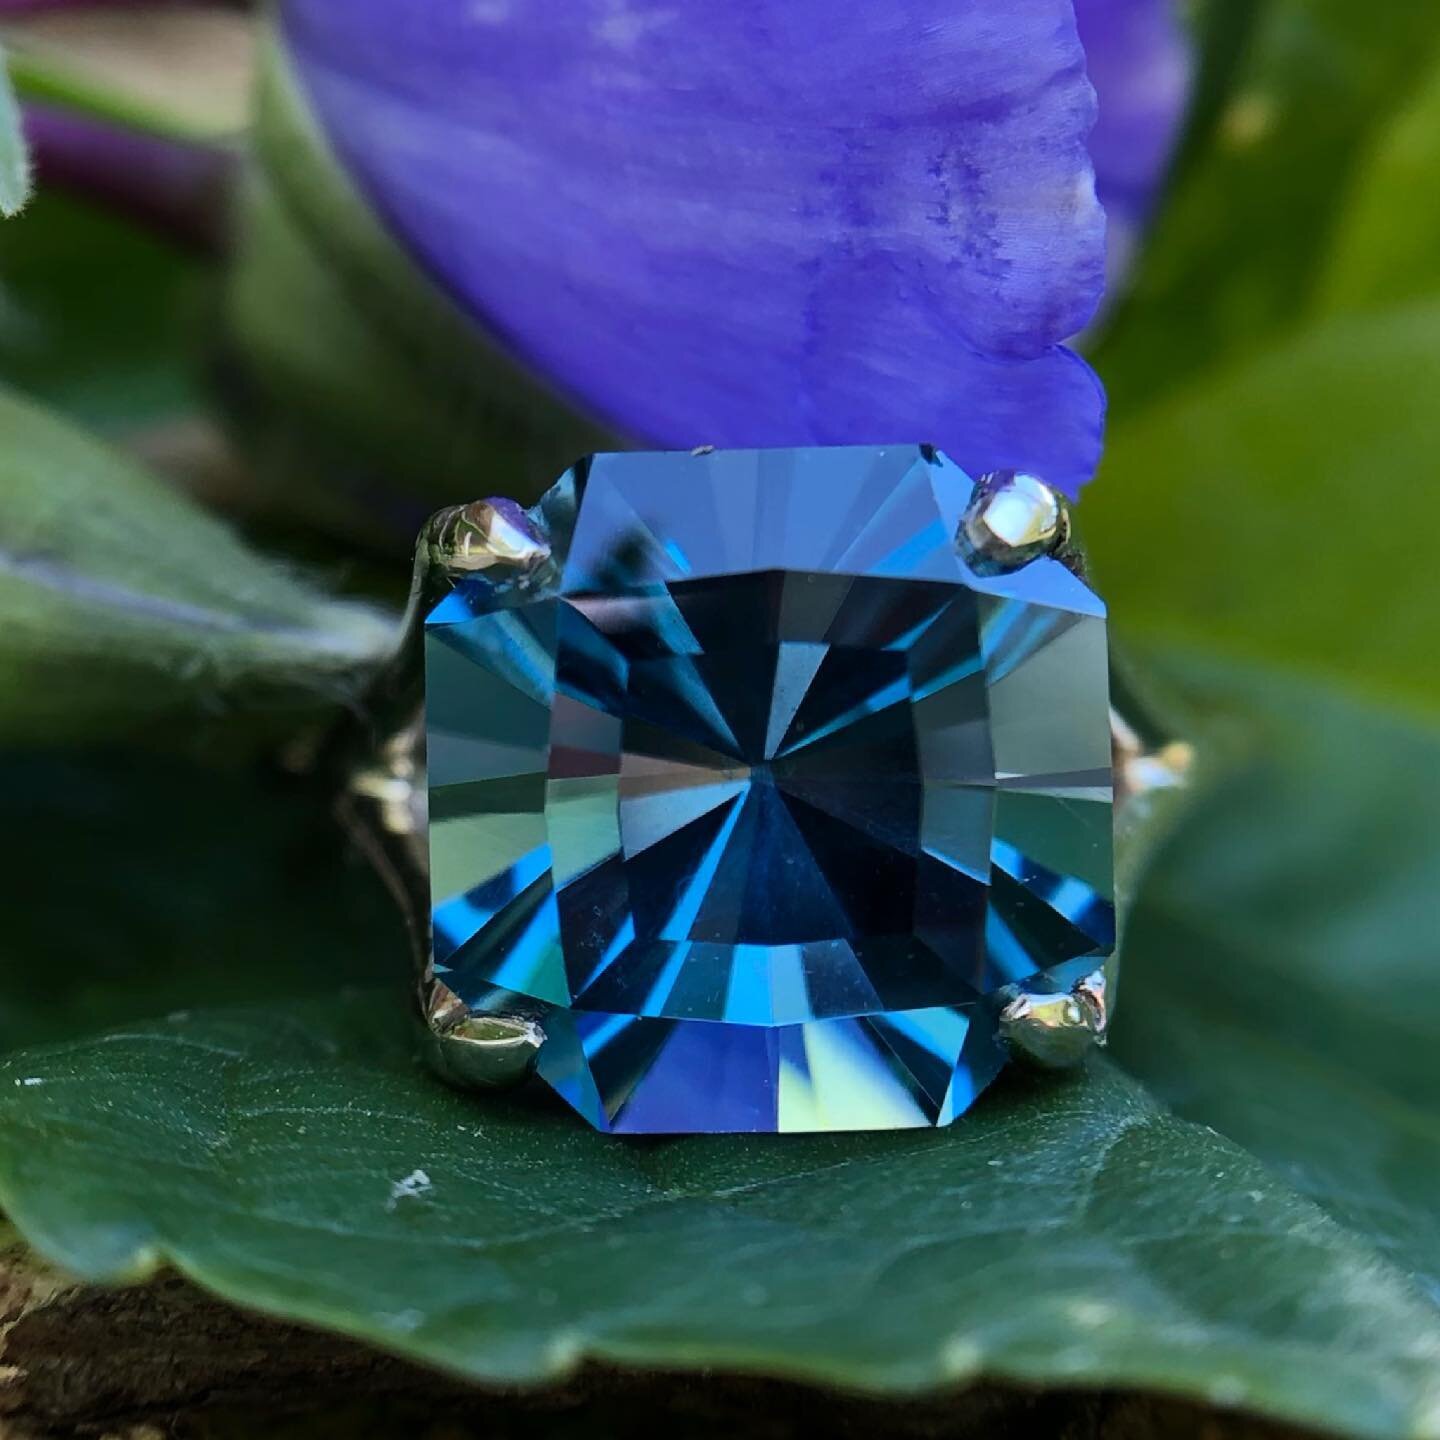 Sometimes less really is more.🔥
London blue topaz cut by me @steadygems in a hand fabricated white gold setting created by my babe, @thewhittlemaster. Designed and made for one of my oldest/greatest friends @bridgetleighc.